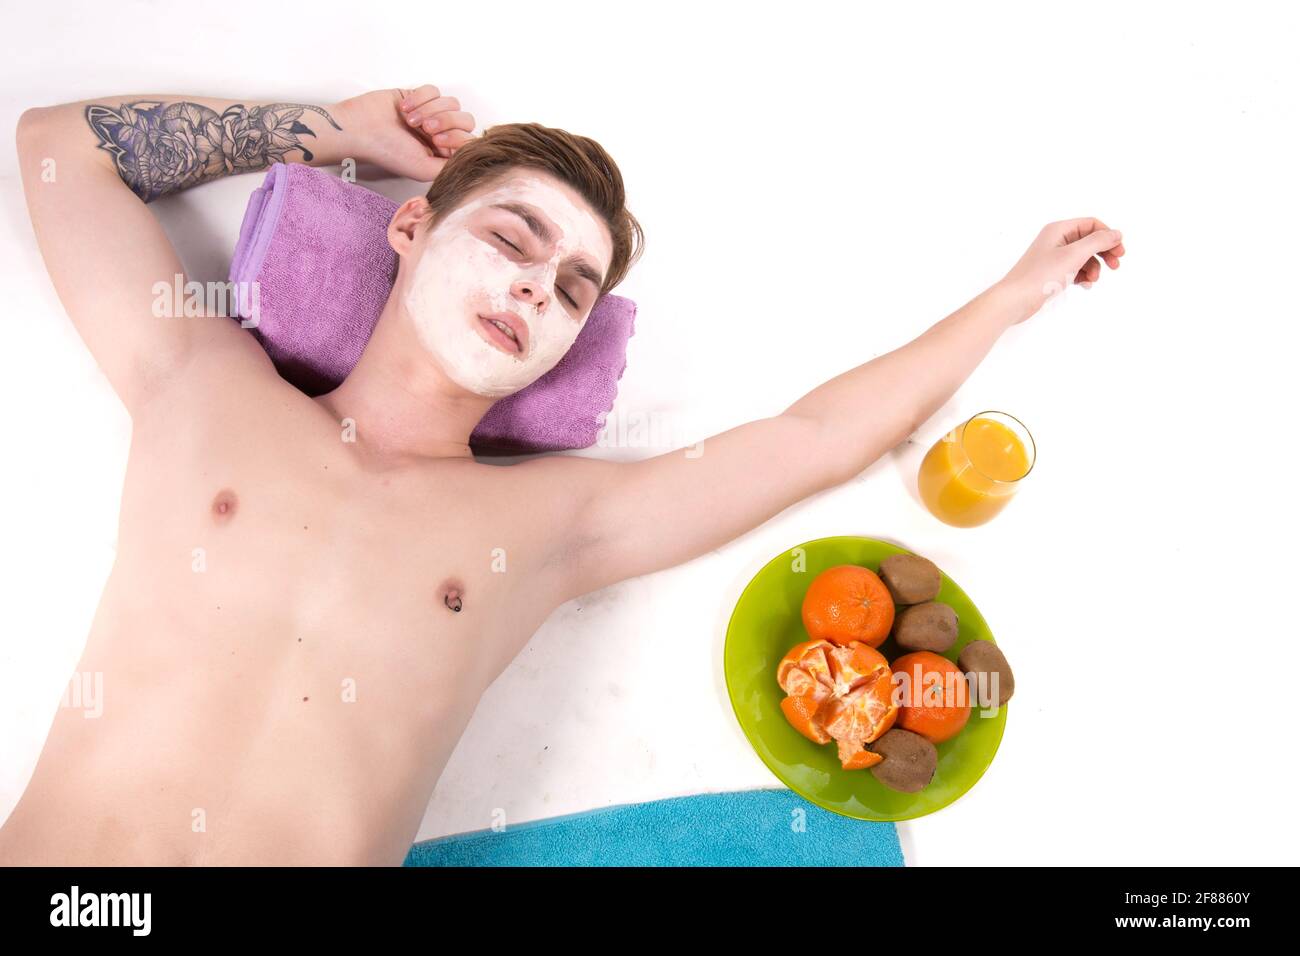 Male beauty. Attractive guy and spa. White background. Stock Photo